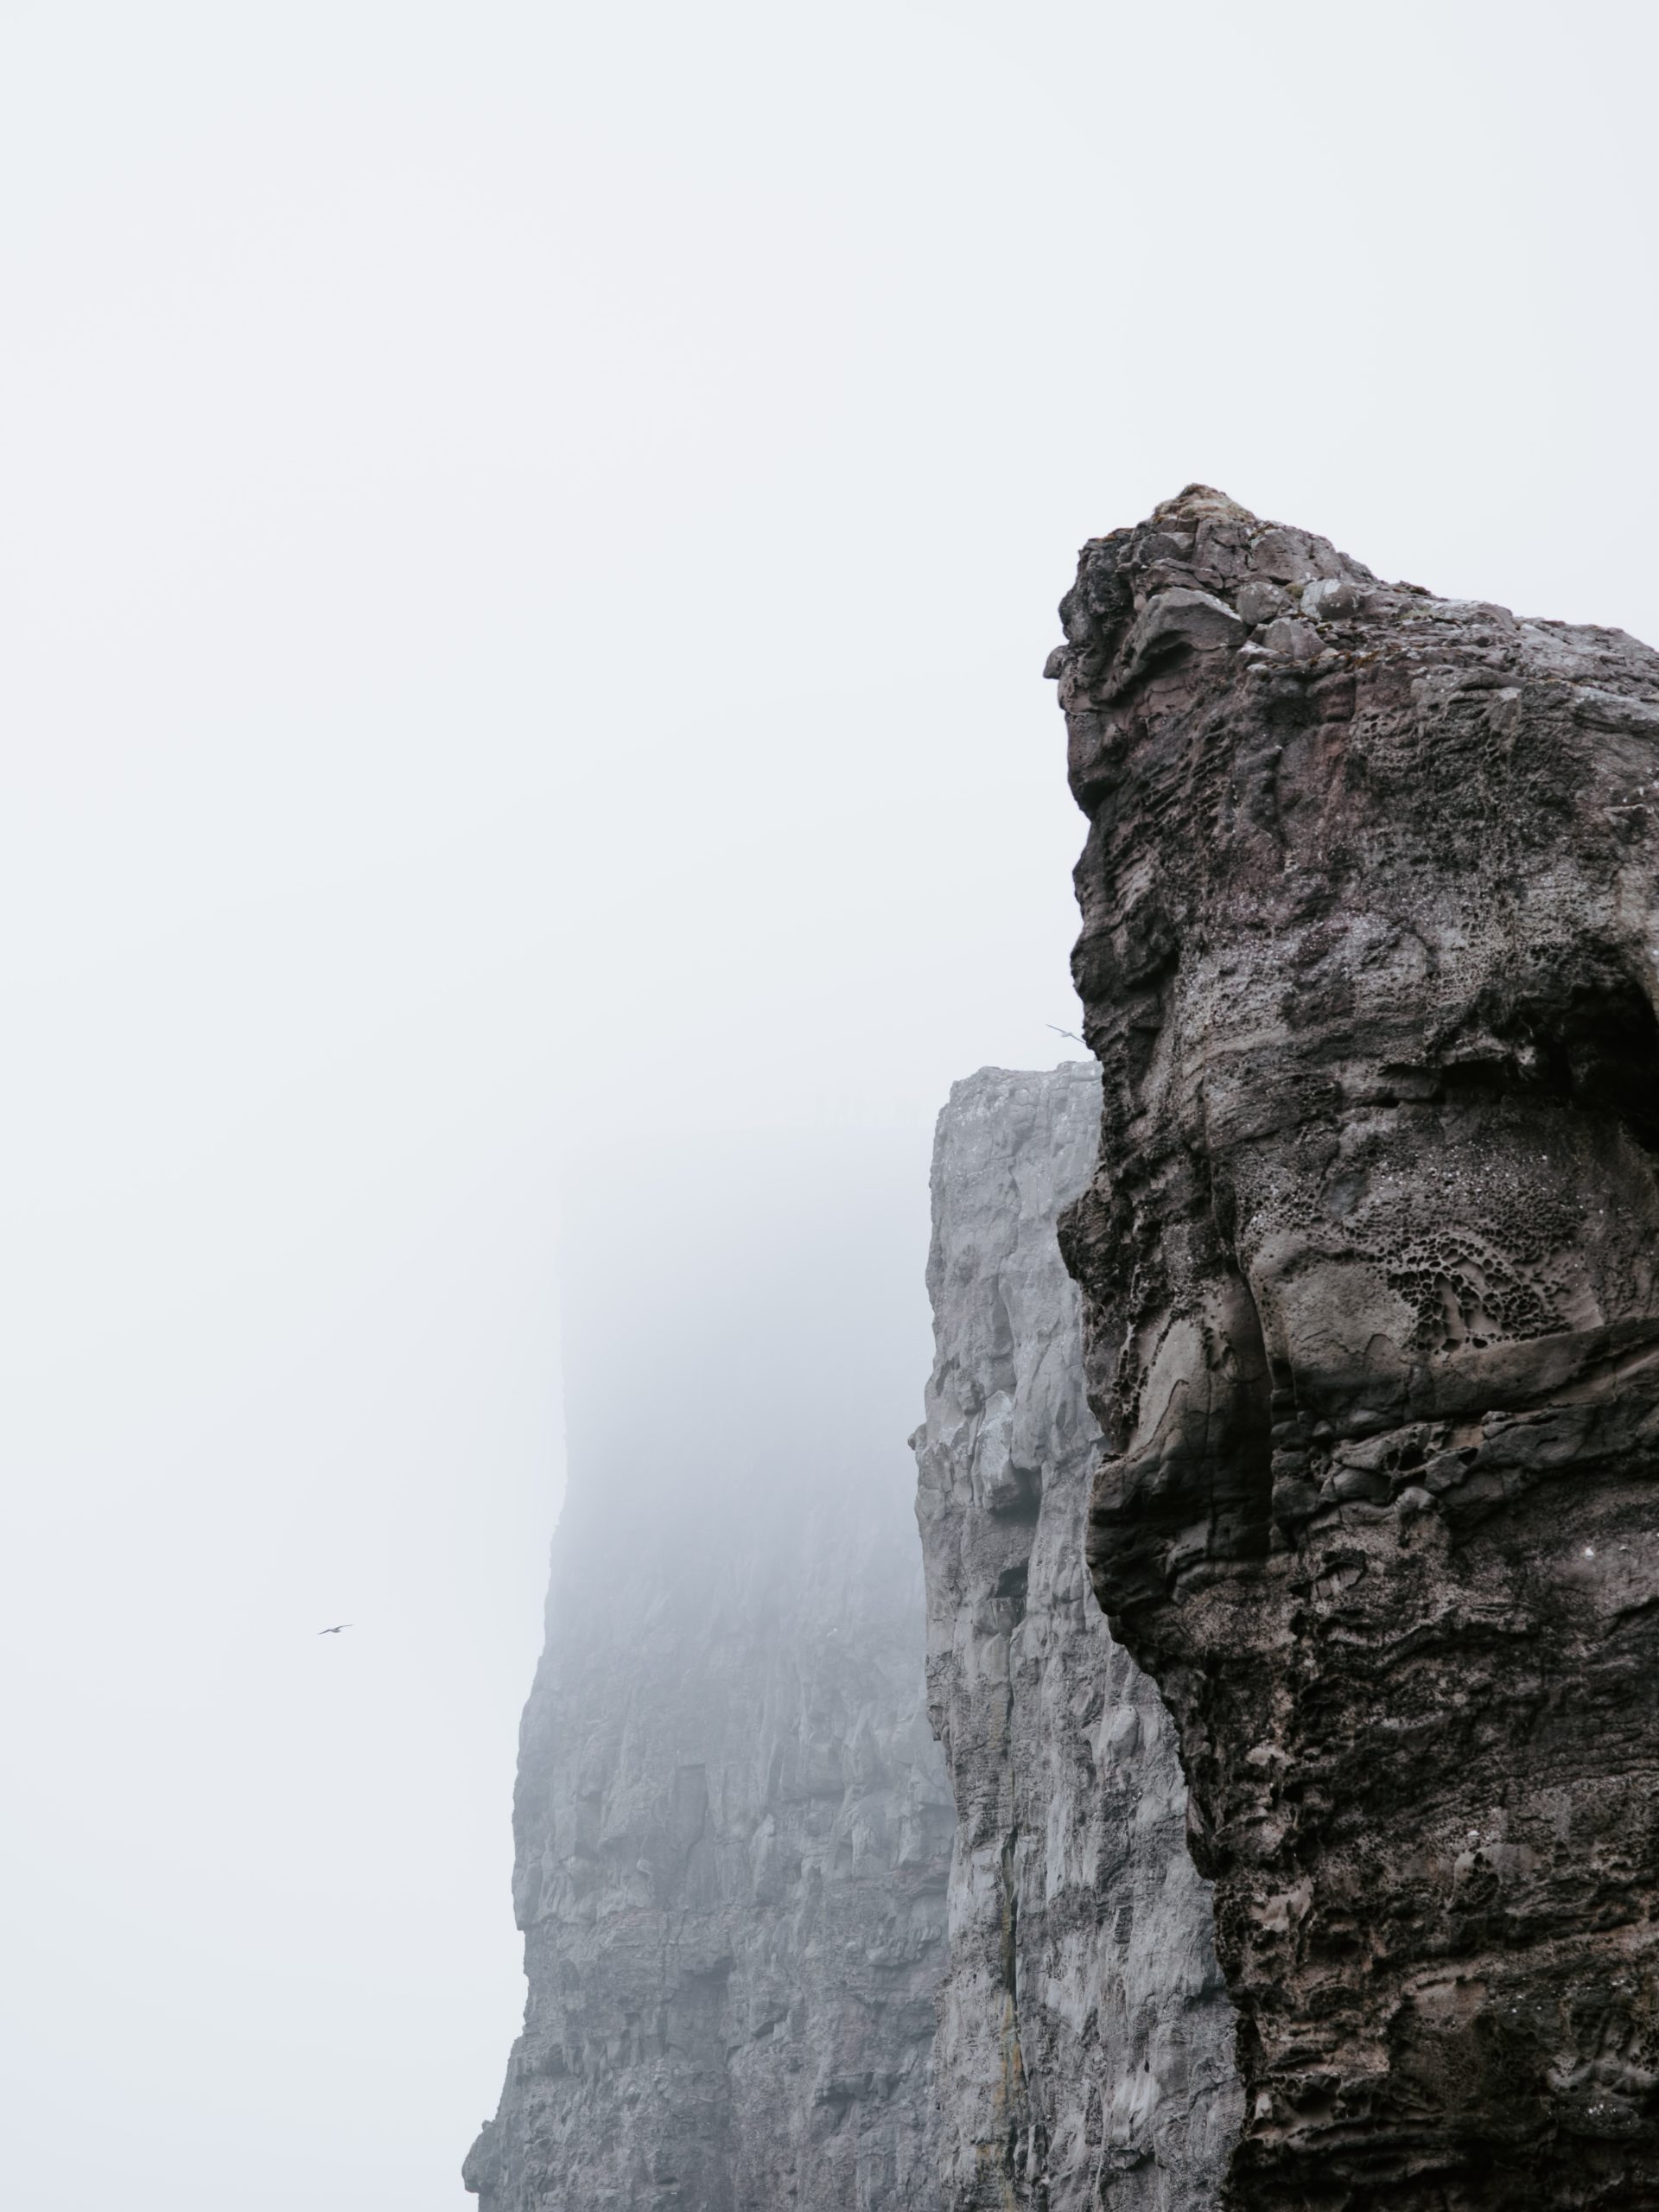 Hedge Fund Manager Claims Bitcoin is Hanging on the “Side of a Cliff”